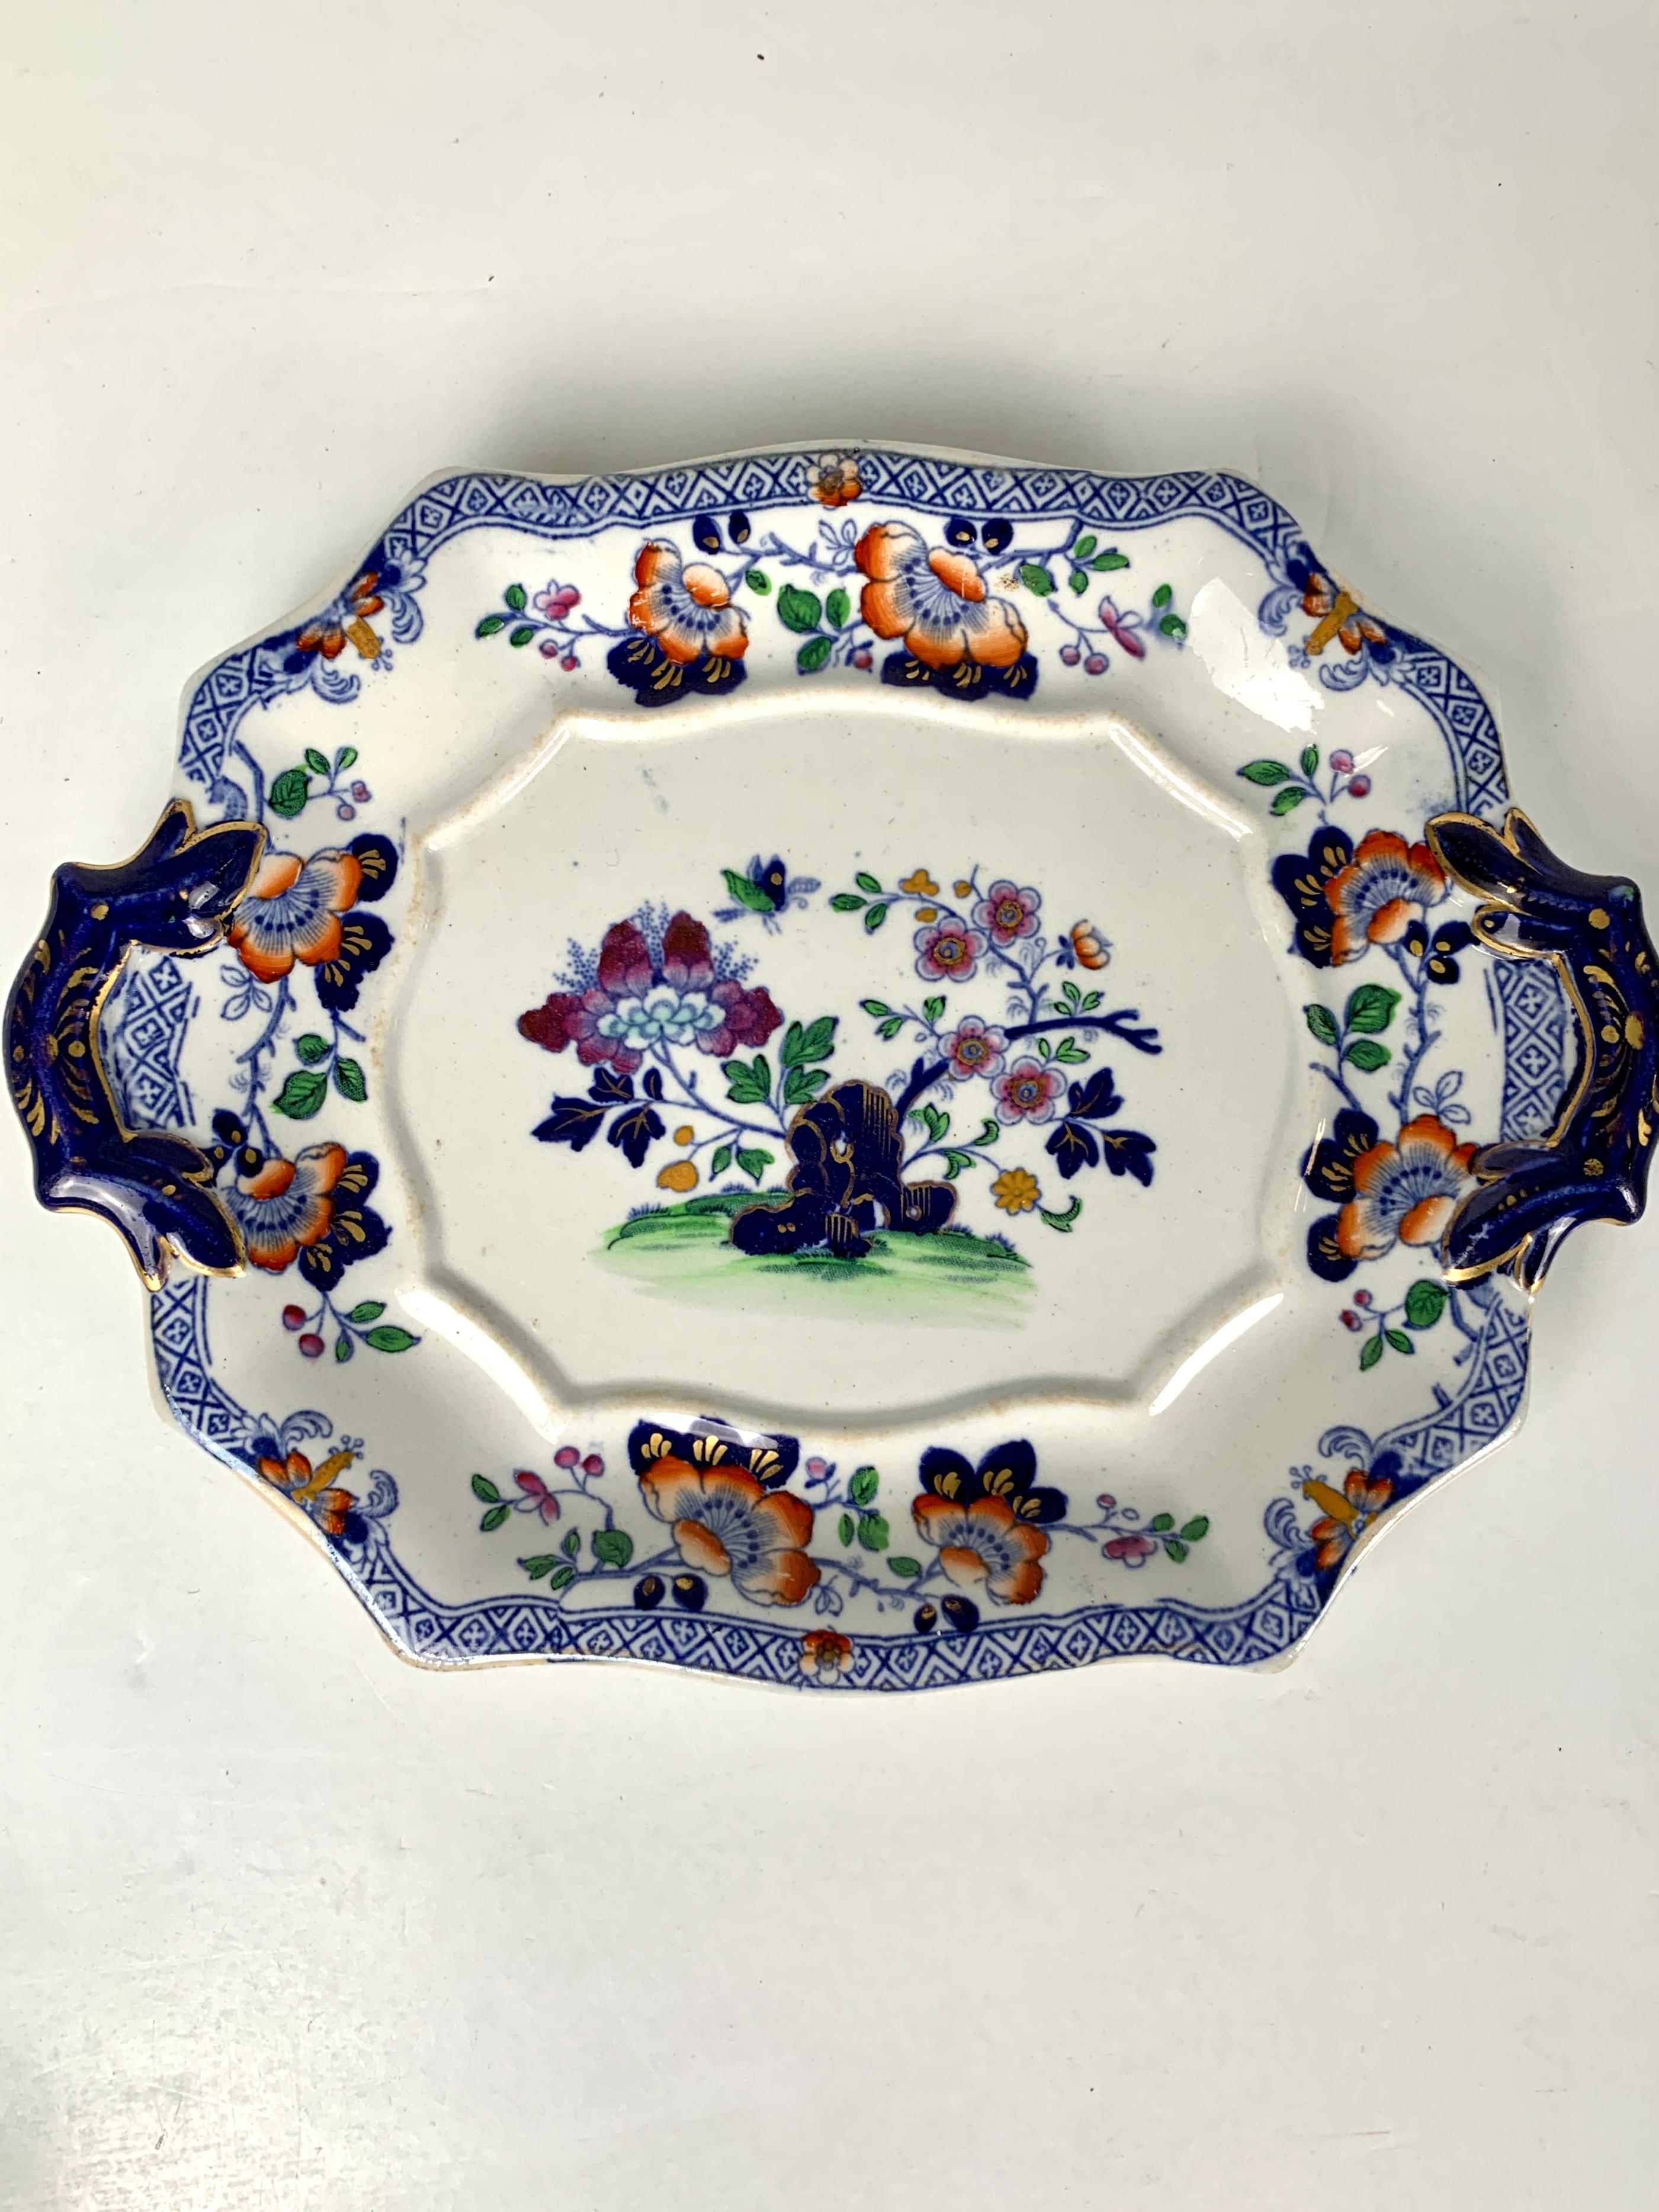 Made by Hicks and Meigh, England, circa 1820.
The items and prices are listed below:
Description of the group: The decoration is lovely: a butterfly hovers above a flower-filled garden.
We see purple peonies and pink fruit tree blossoms emanating